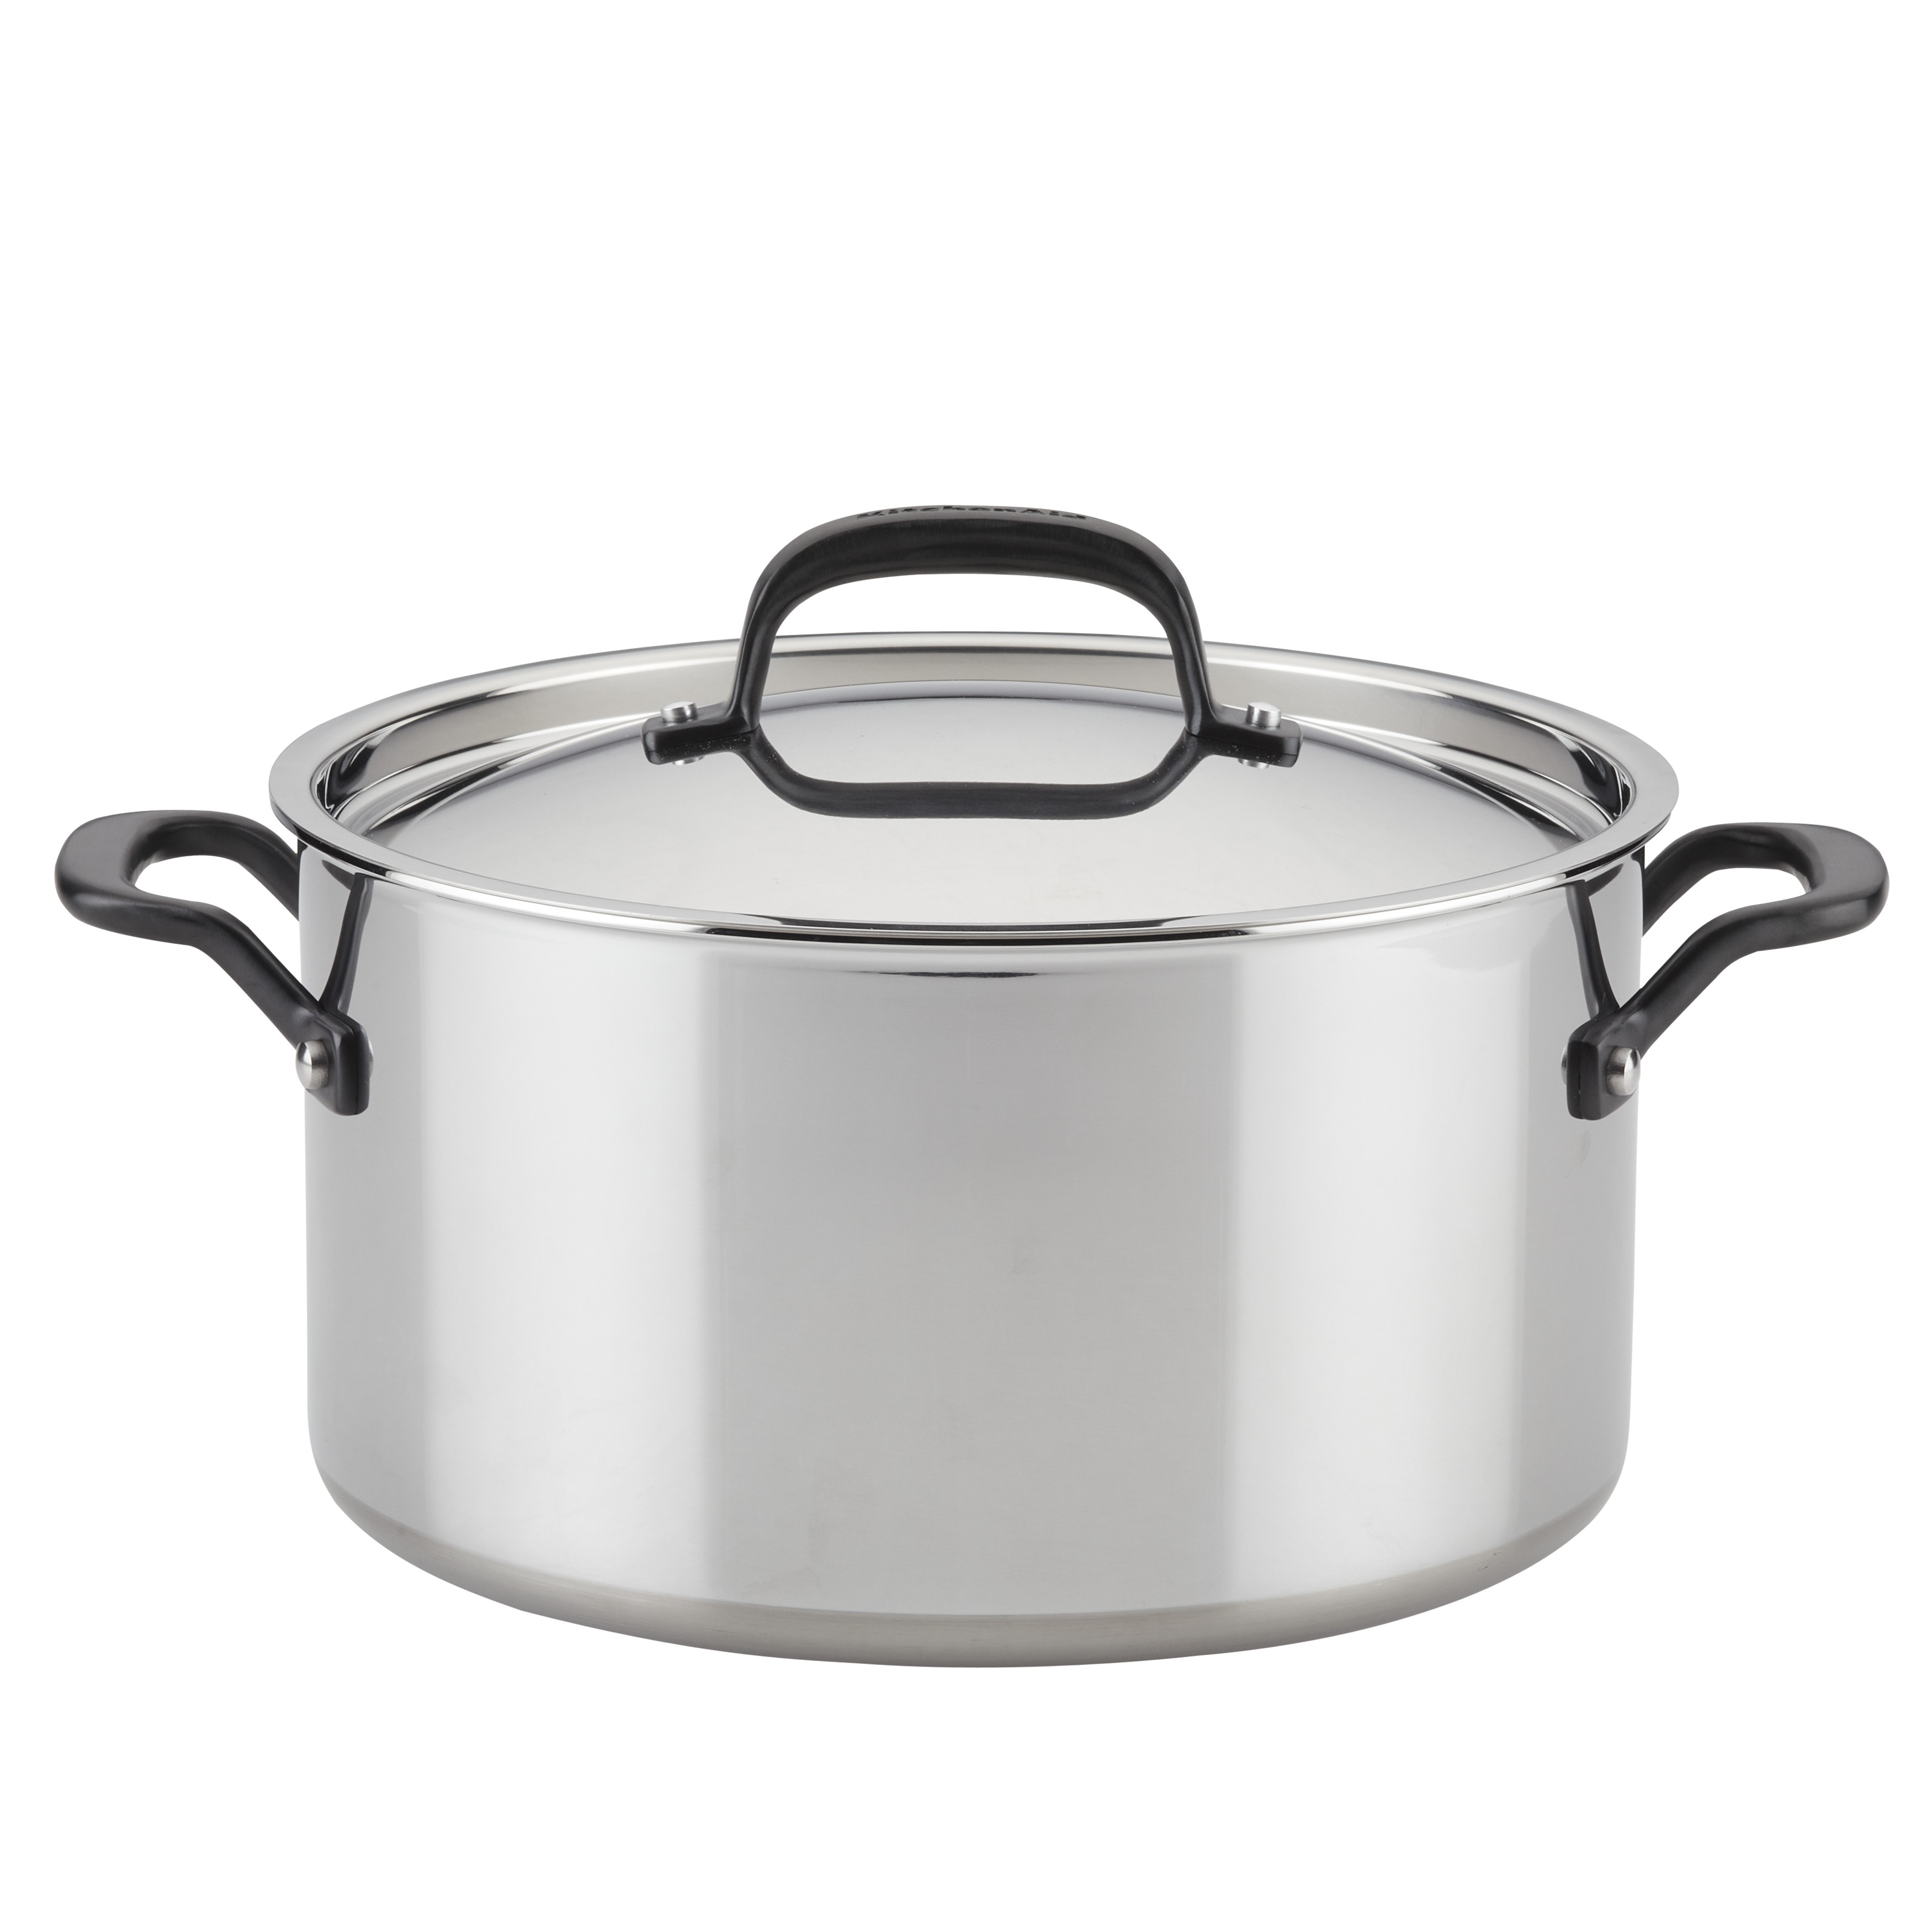 https://ak1.ostkcdn.com/images/products/is/images/direct/b9ef0c43f116f35fc3c6d6337ba1c1ba2edd8aab/KitchenAid-5-Ply-Clad-Stainless-Steel-Stockpot-with-Lid%2C-8qt.jpg